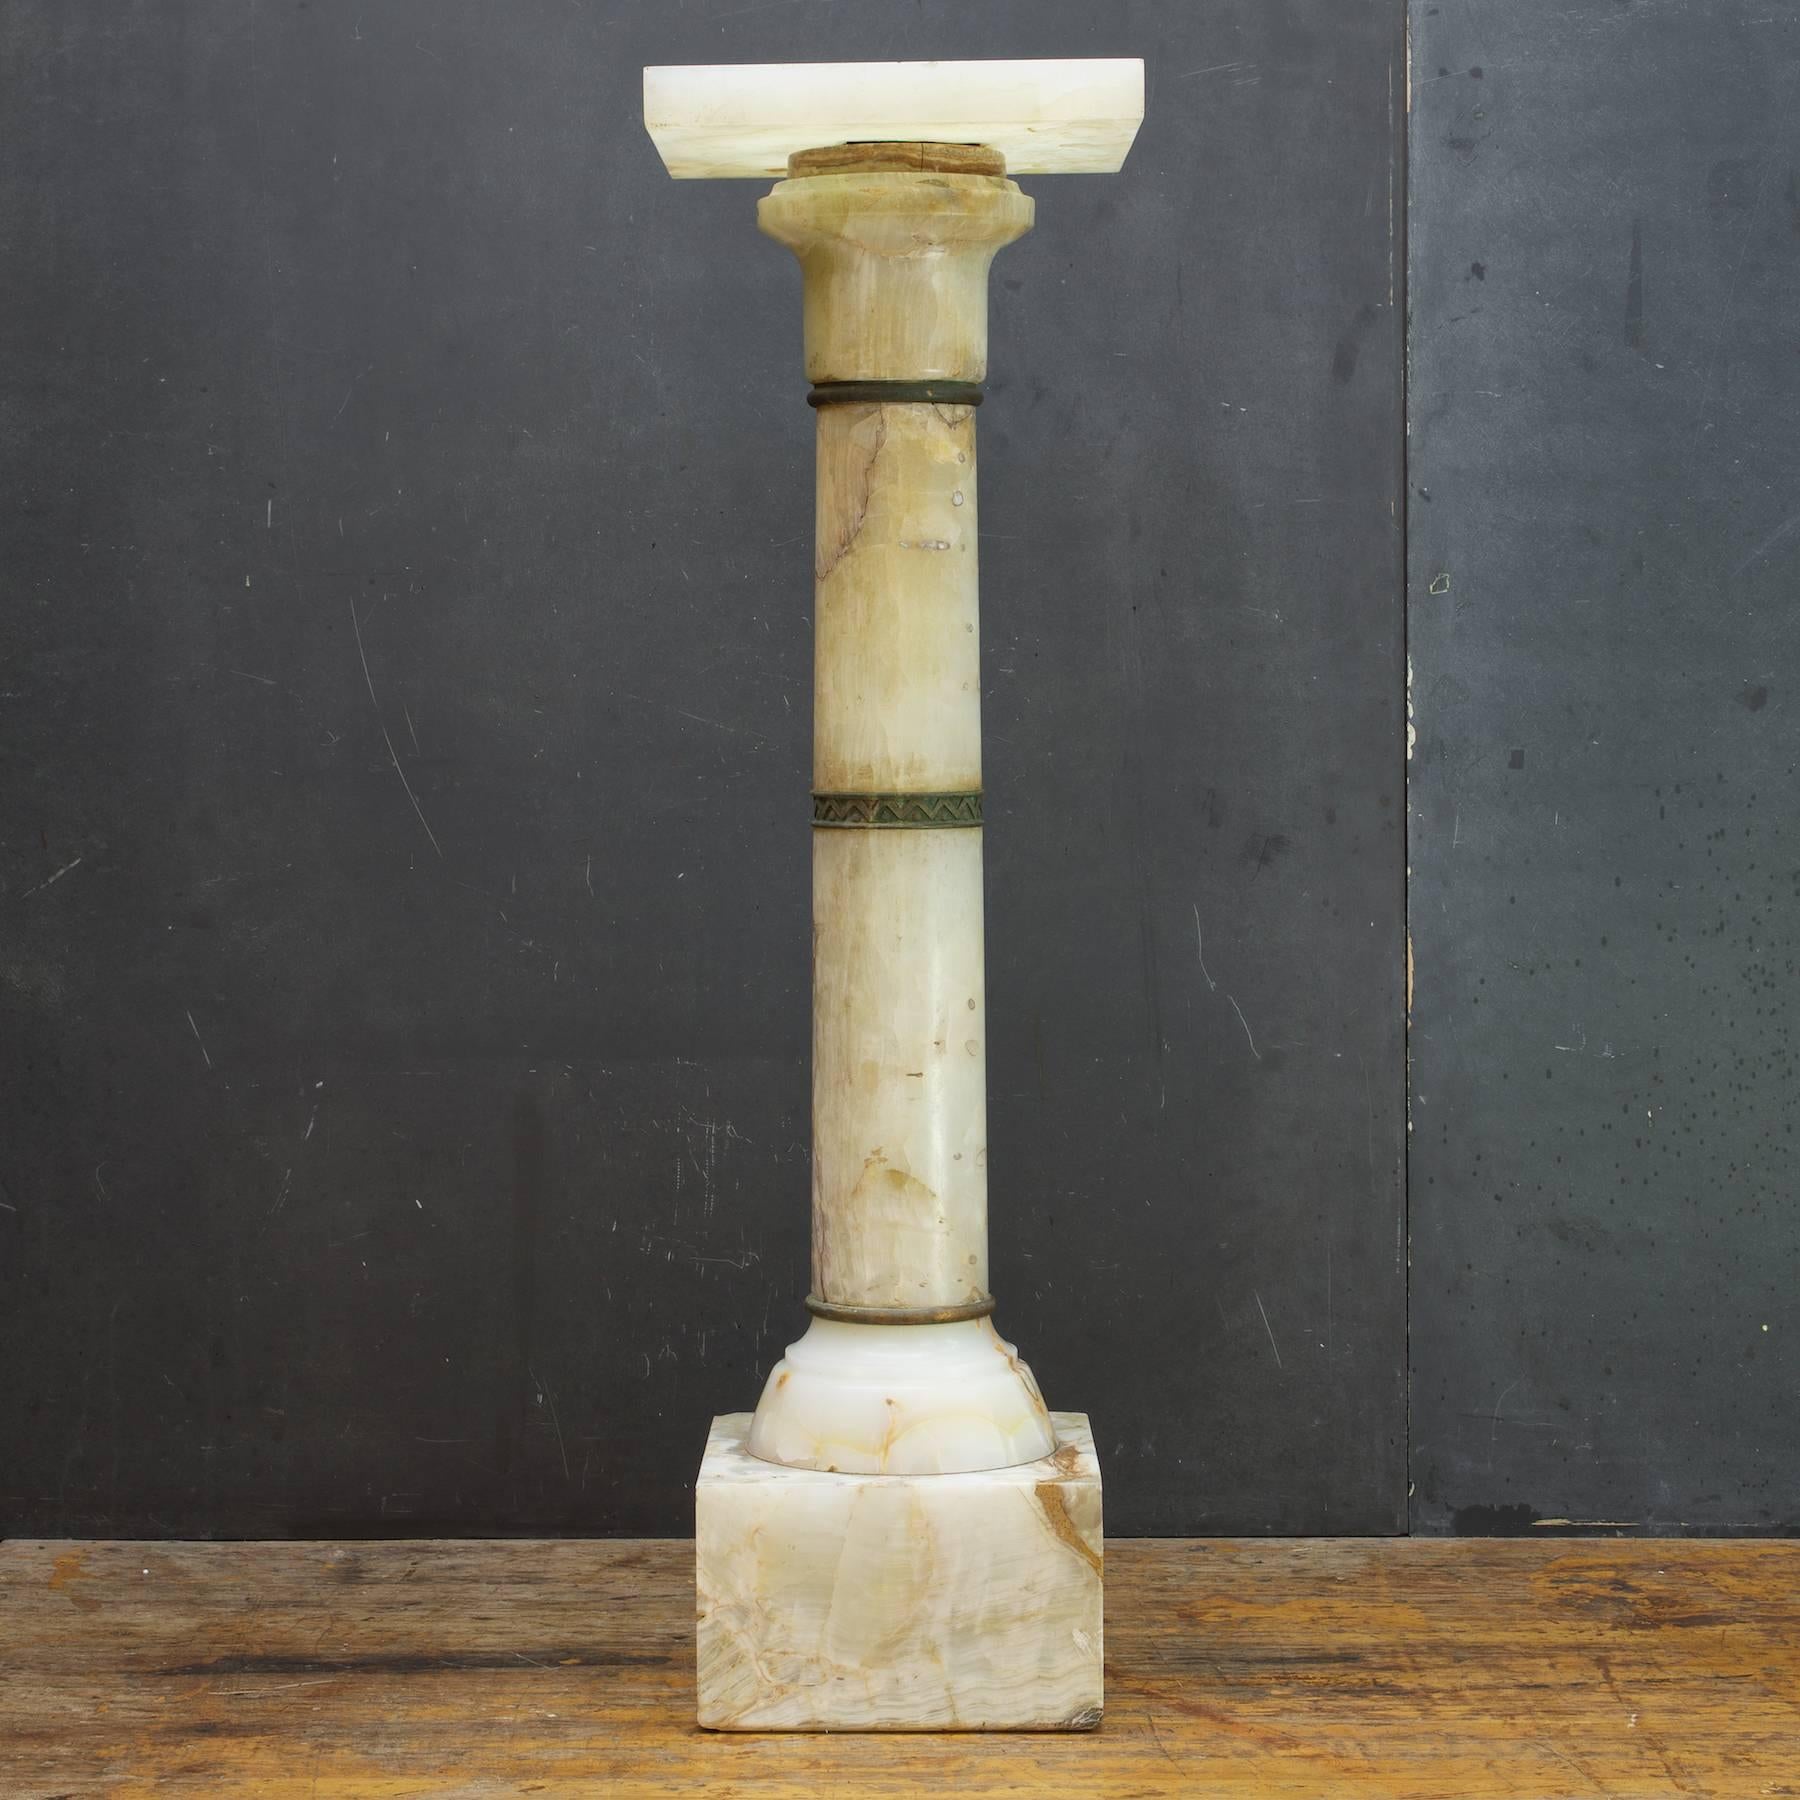 Hollywood Mansion Sculpture Bust Stand, the marble column design is slightly Doric, possibly French. It is ringed with cast bronze metal elements. The top revolves smoothly. 

An antique piece showing its age but very presentable, beautiful and